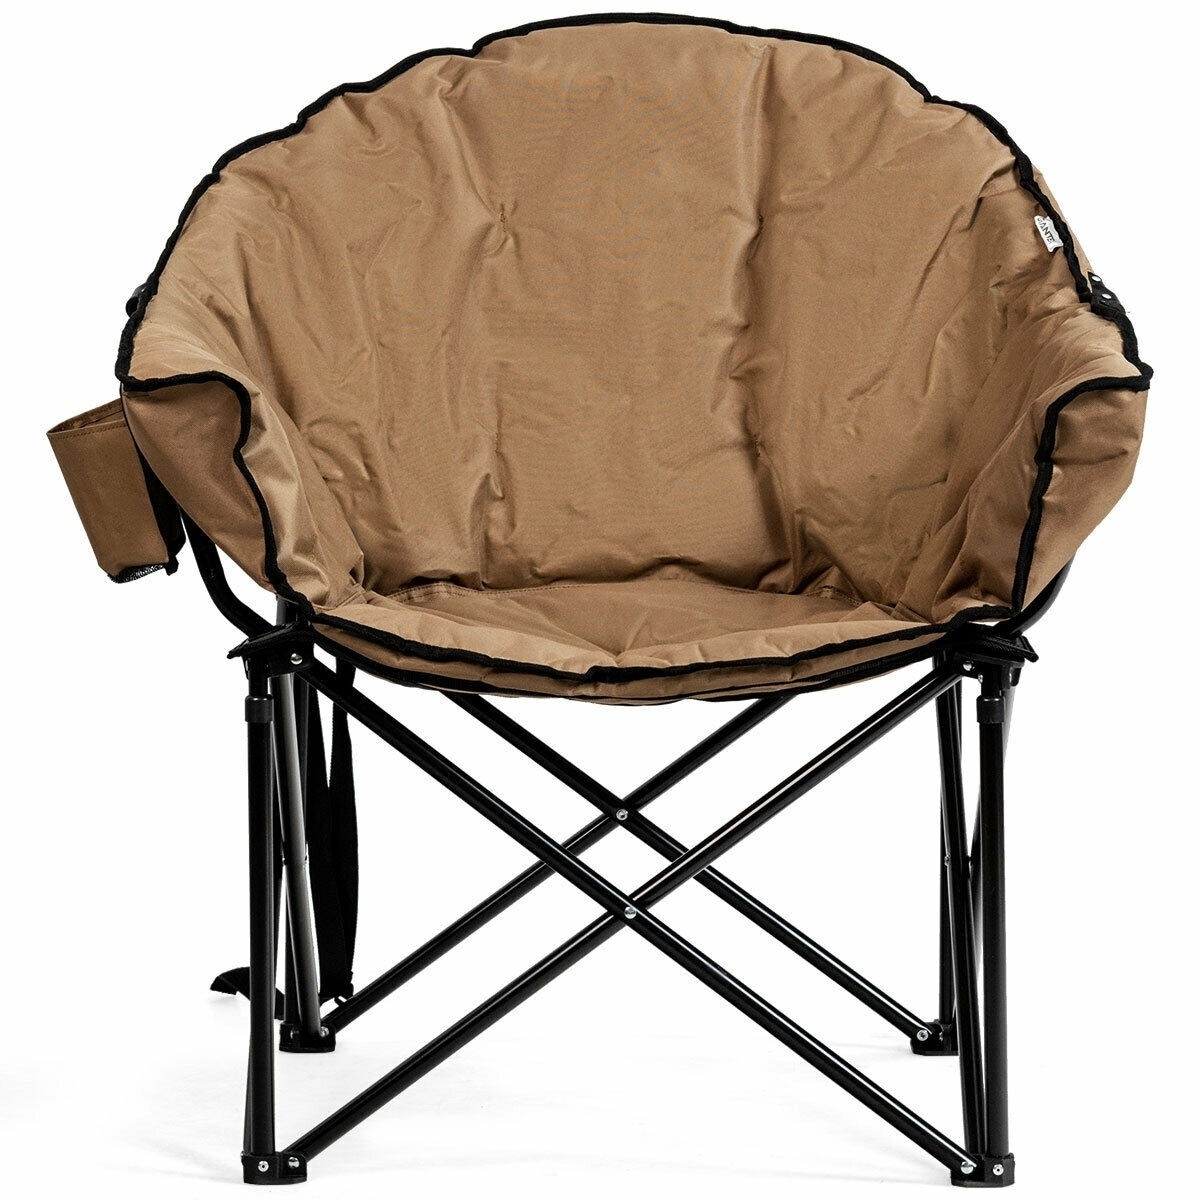 https://ak1.ostkcdn.com/images/products/is/images/direct/52e083170c2143fc1ba195233738b71363a5aa3c/Folding-Camping-Moon-Padded-Chair-with-Carry-Bag.jpg